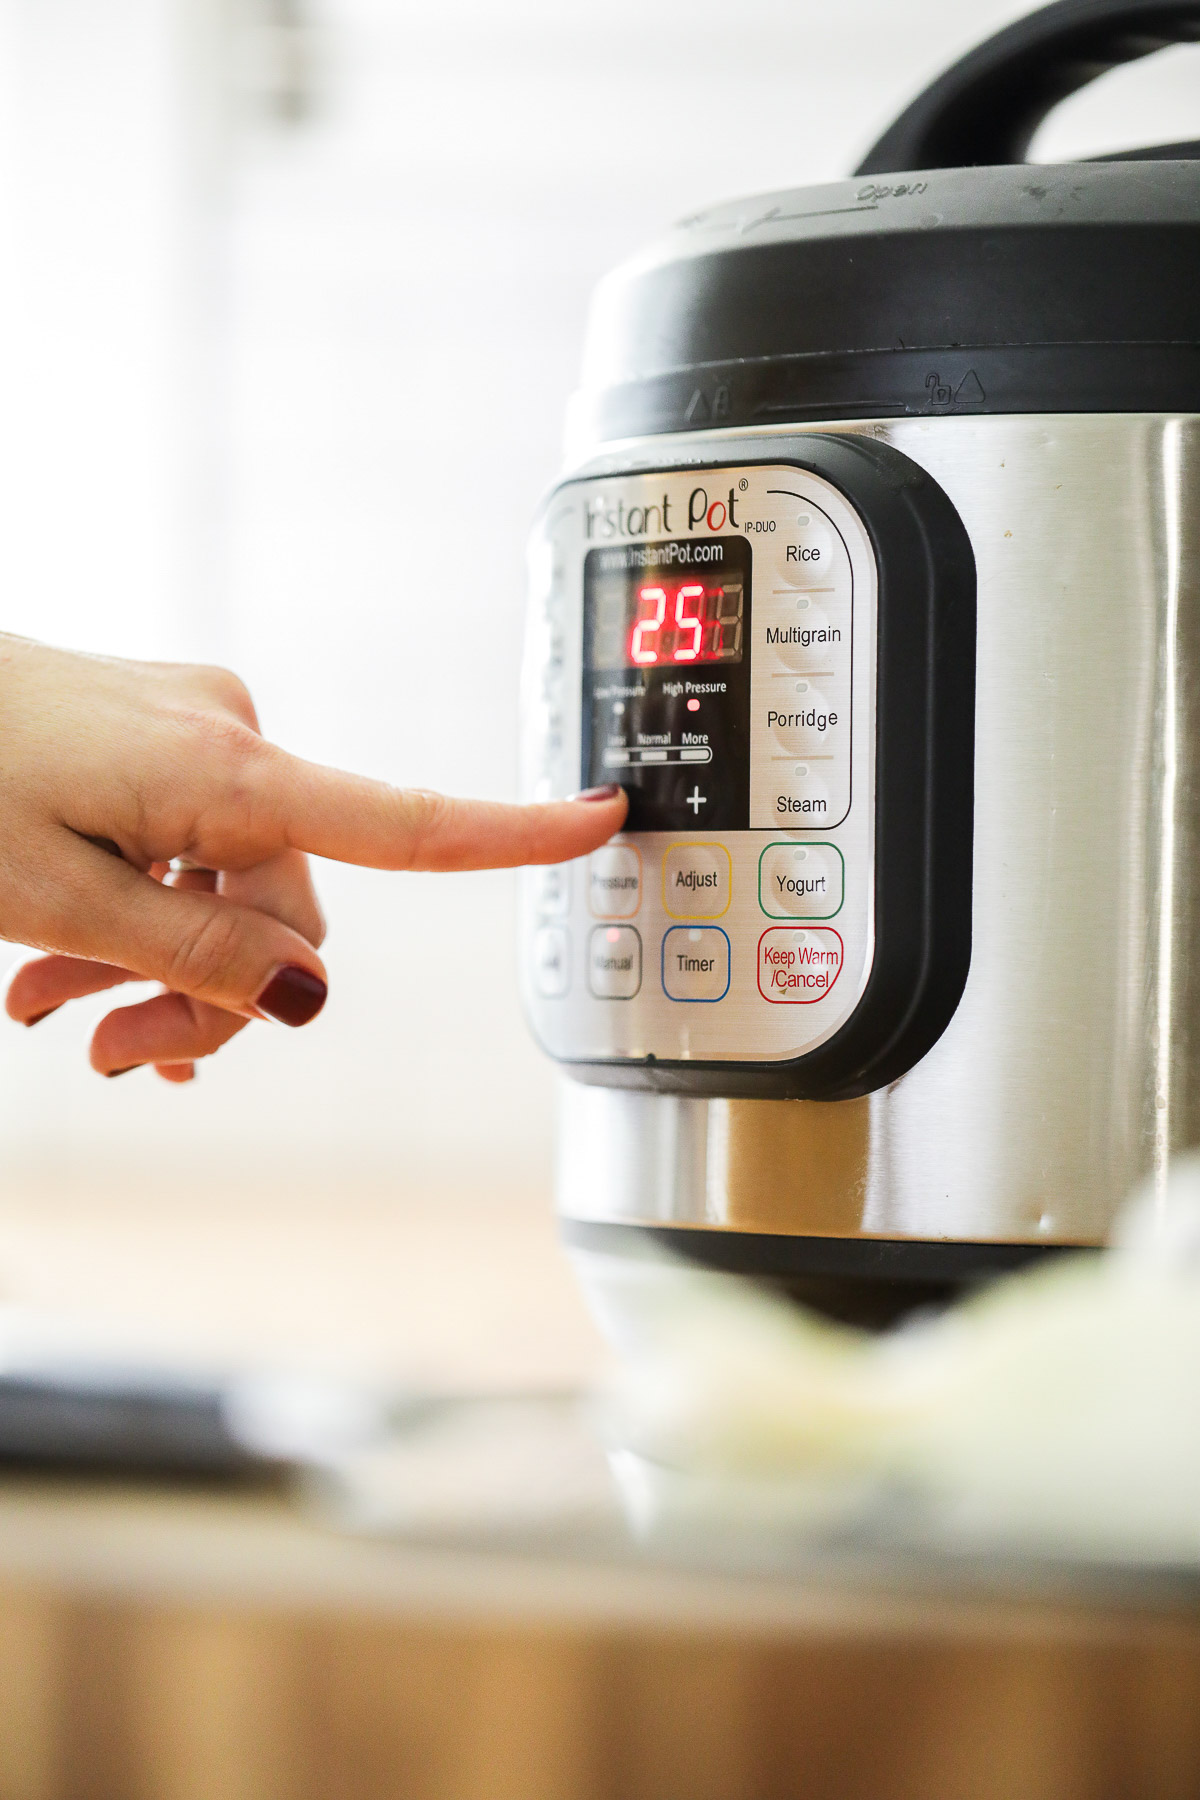 A finger pressing the pressure cook setting on the front of the Instant Pot.